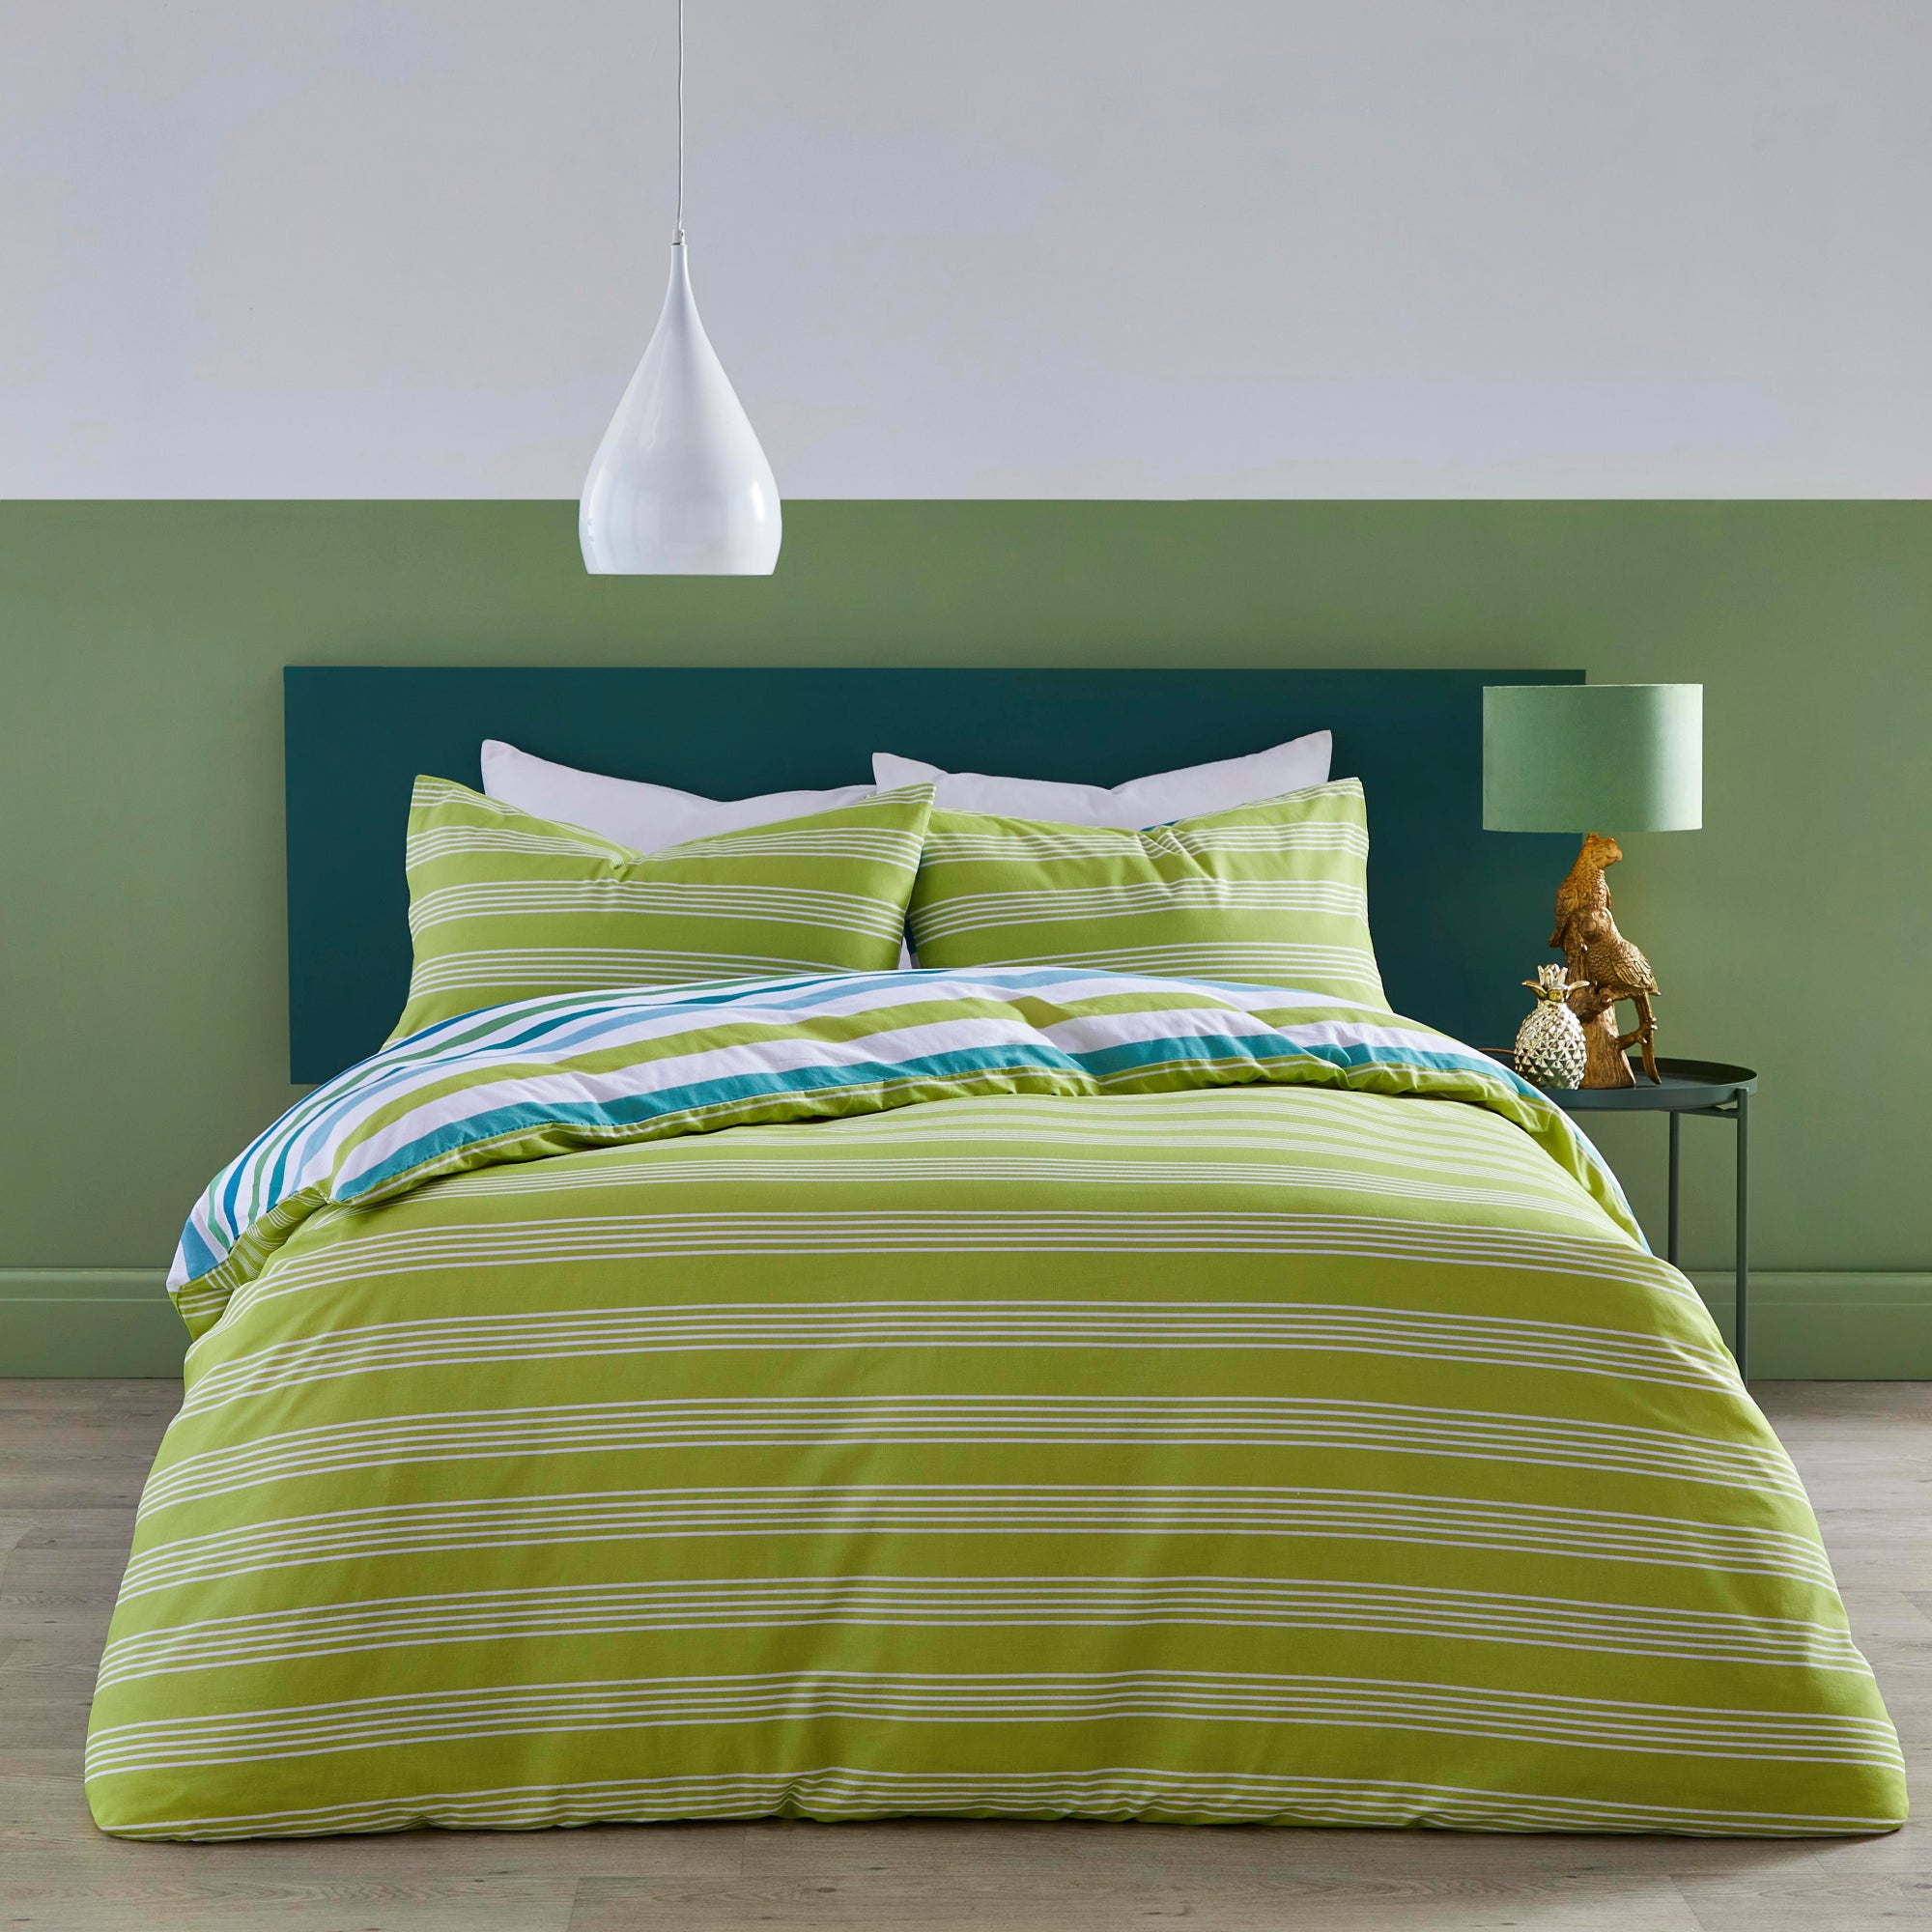 Duvet Cover Set Carlson Stripe by Fusion in Green